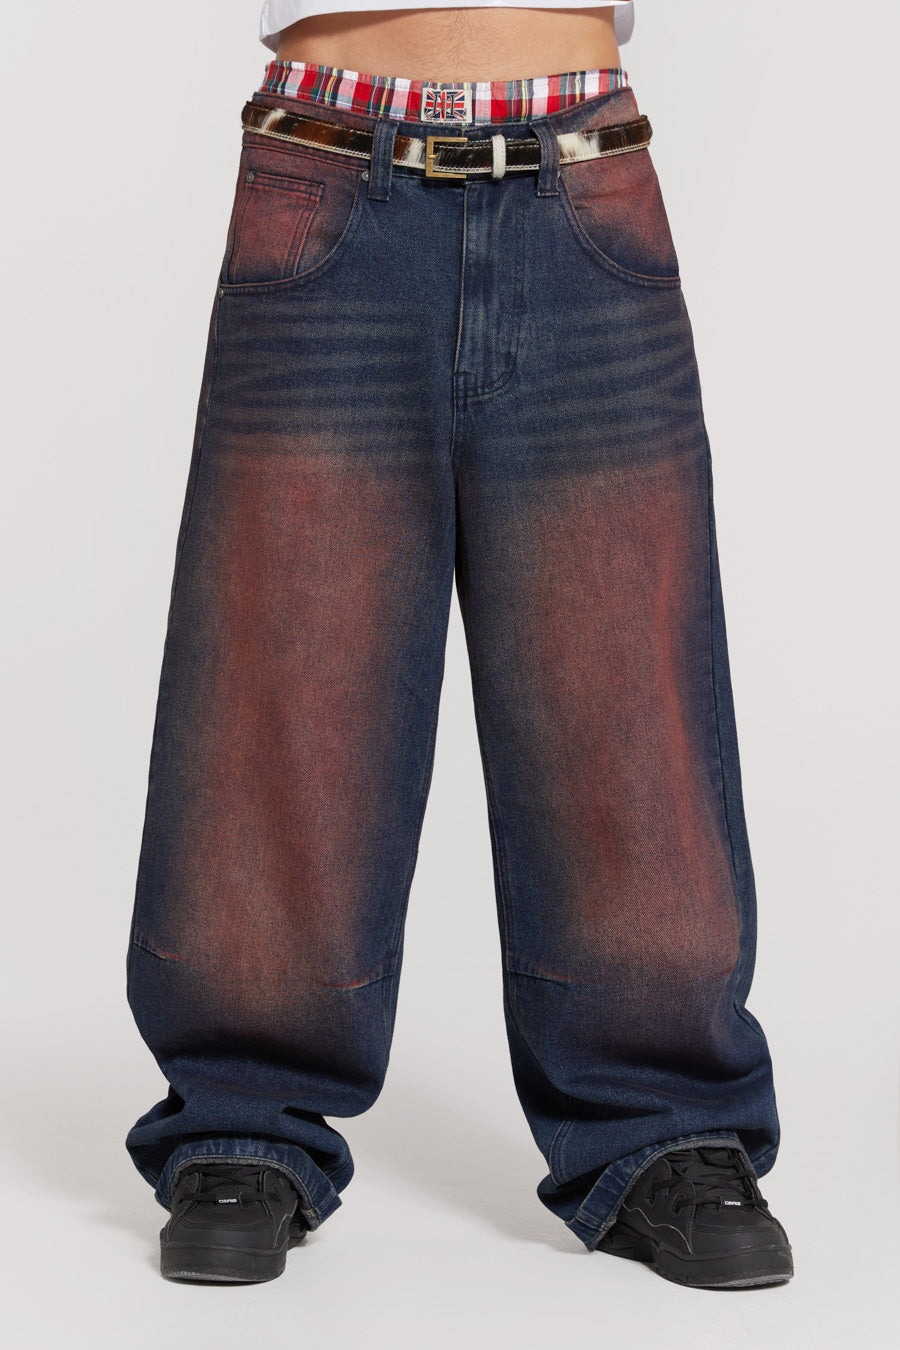 Deep Red Colossus Baggy Jeans